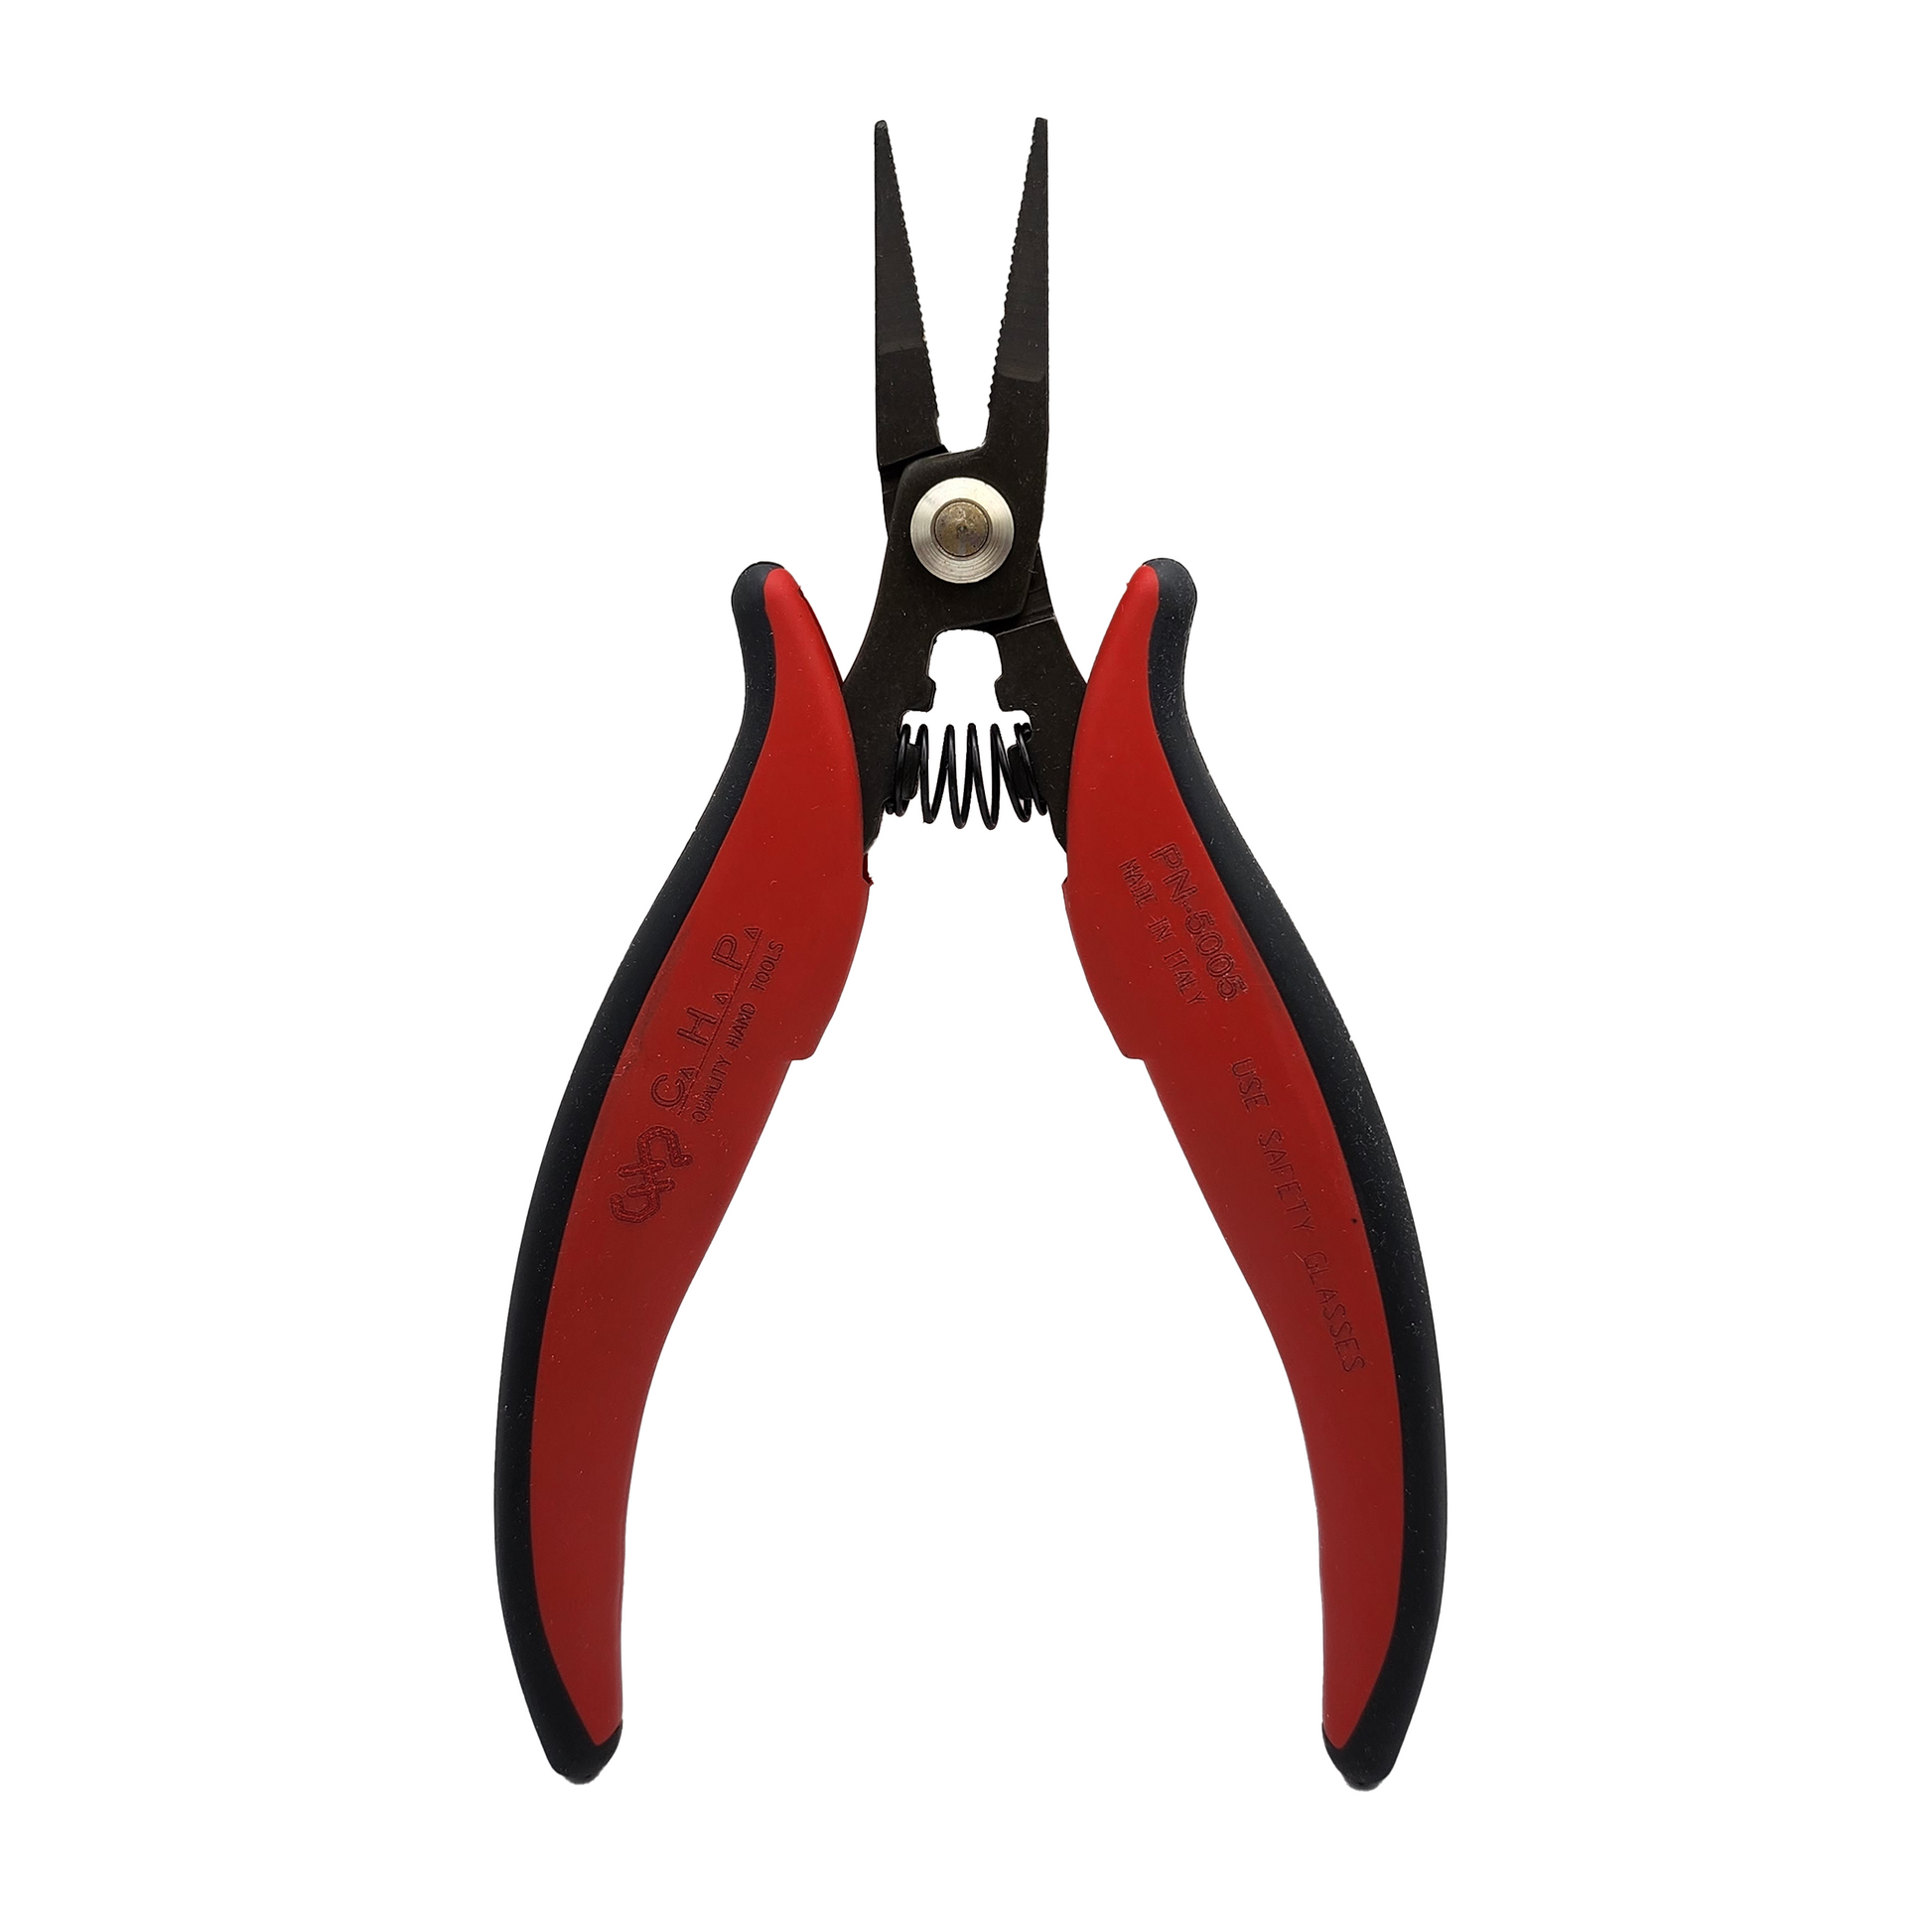 CHP_ CHP PN-5005_ Cutters, Pliers, Multi-Tools_ Hakko Products